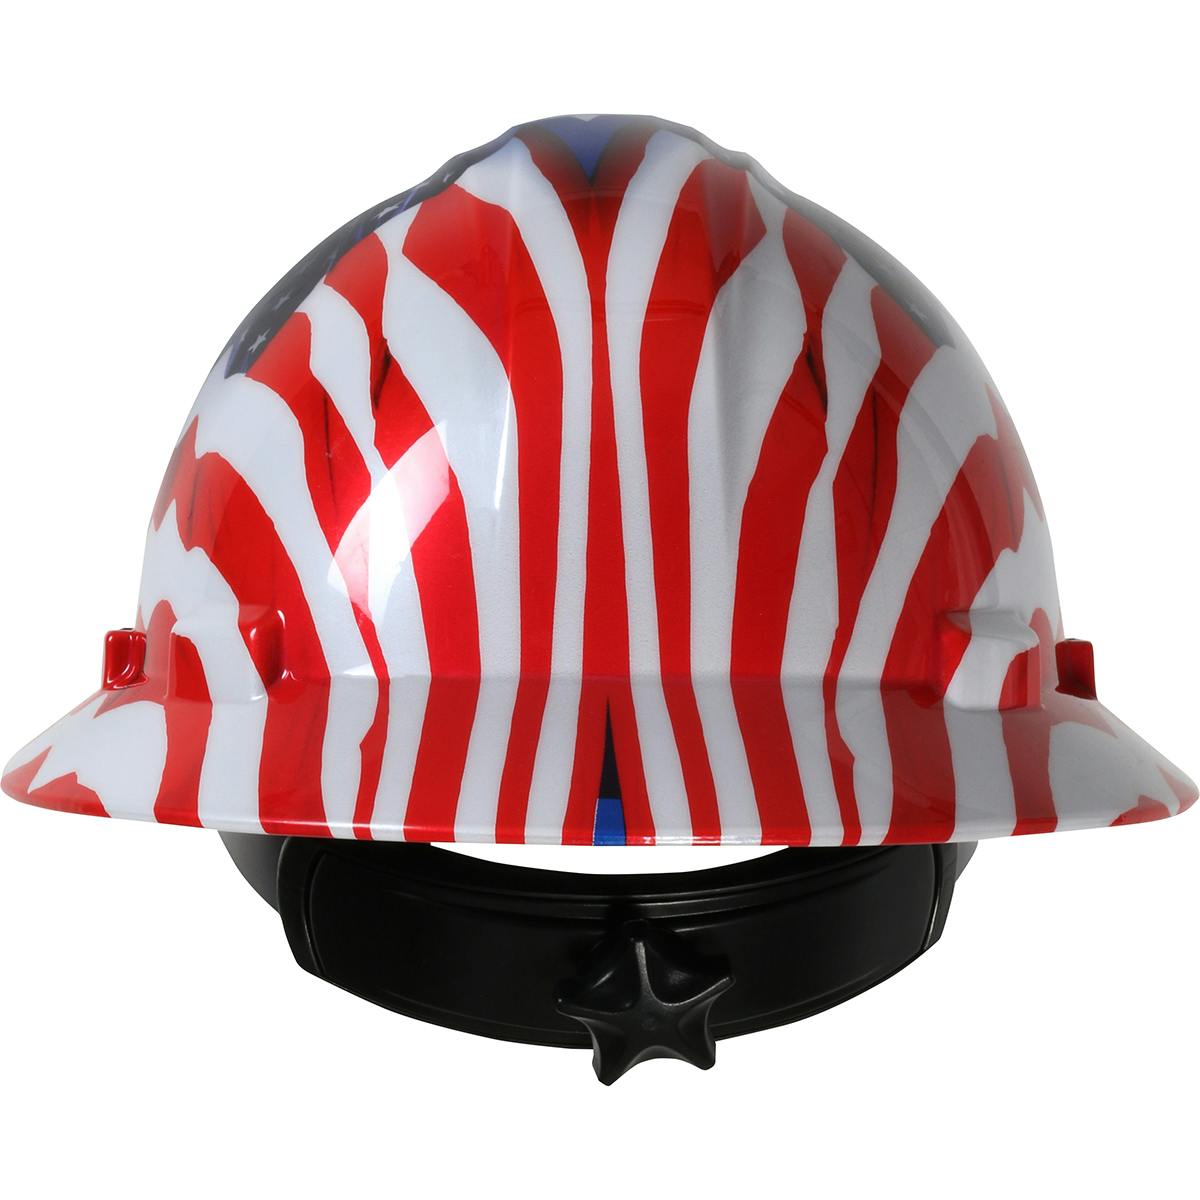 Full Brim Hard Hat with HDPE Shell, 4-Point Textile Suspension Graphic Wrap and Wheel Ratchet Adjustment, Navy (280-HP641R-USA) - OS_1